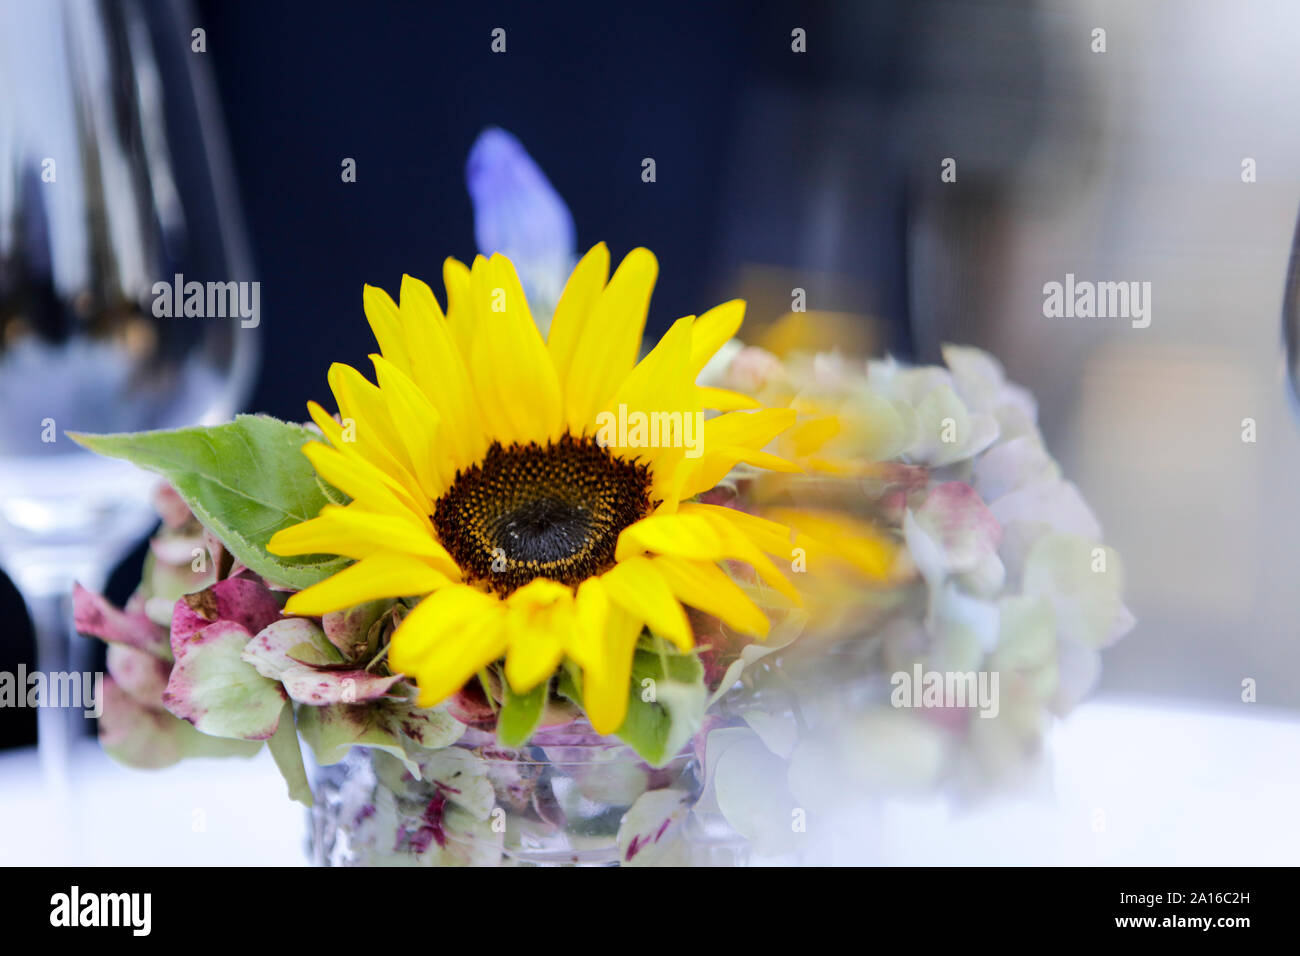 Gerbera daisy in glass at social gathering. Focus on foreground. Stock Photo